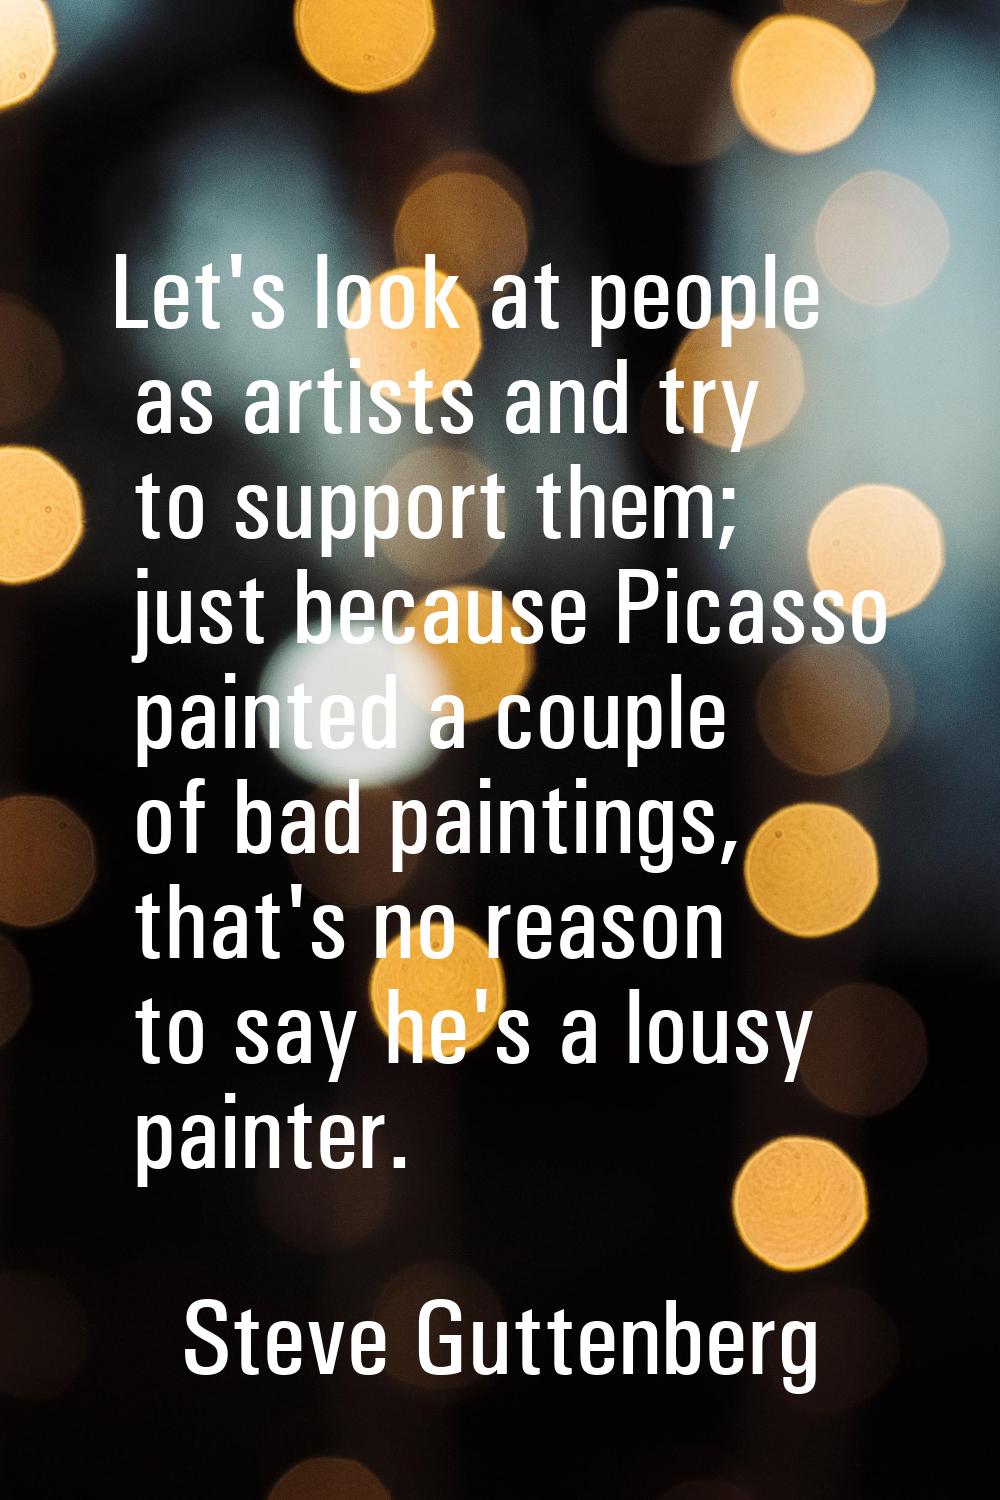 Let's look at people as artists and try to support them; just because Picasso painted a couple of b